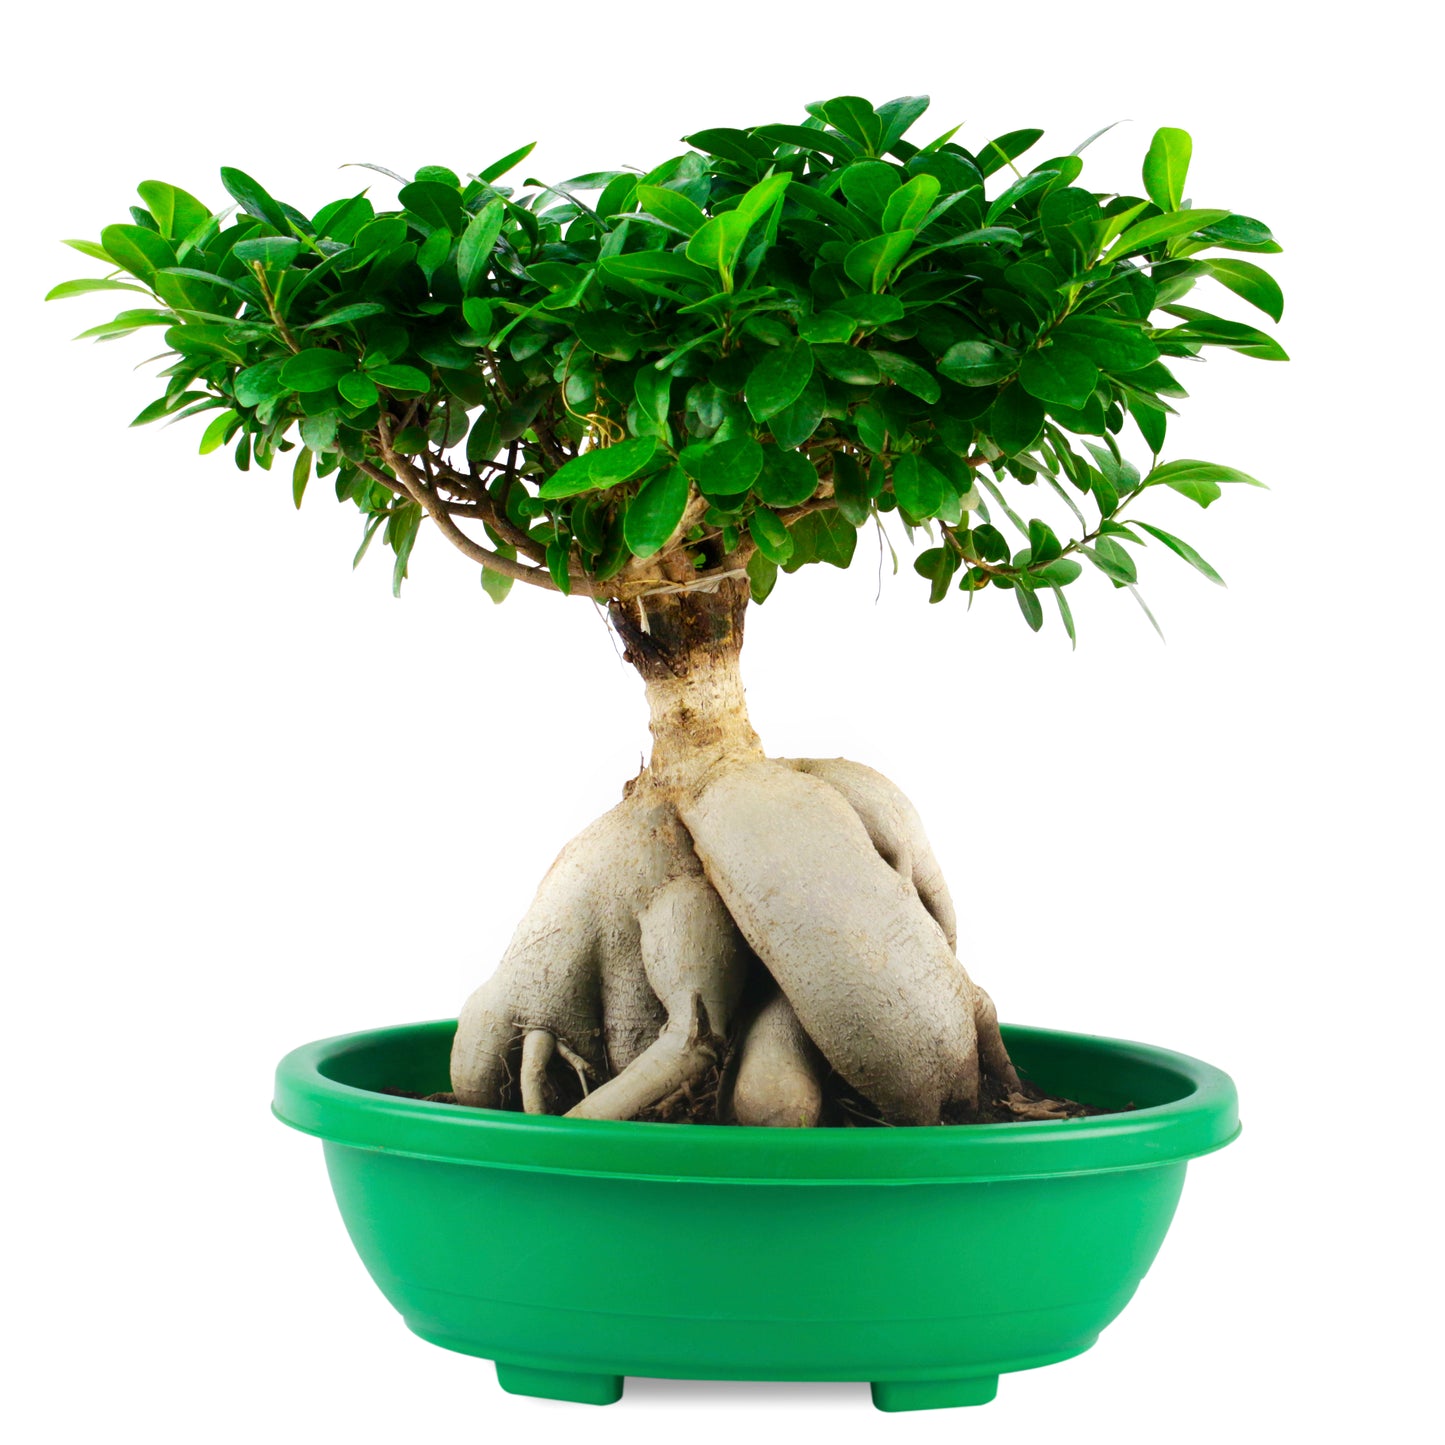 Ficus Bonsai Live tree with green Round Pot